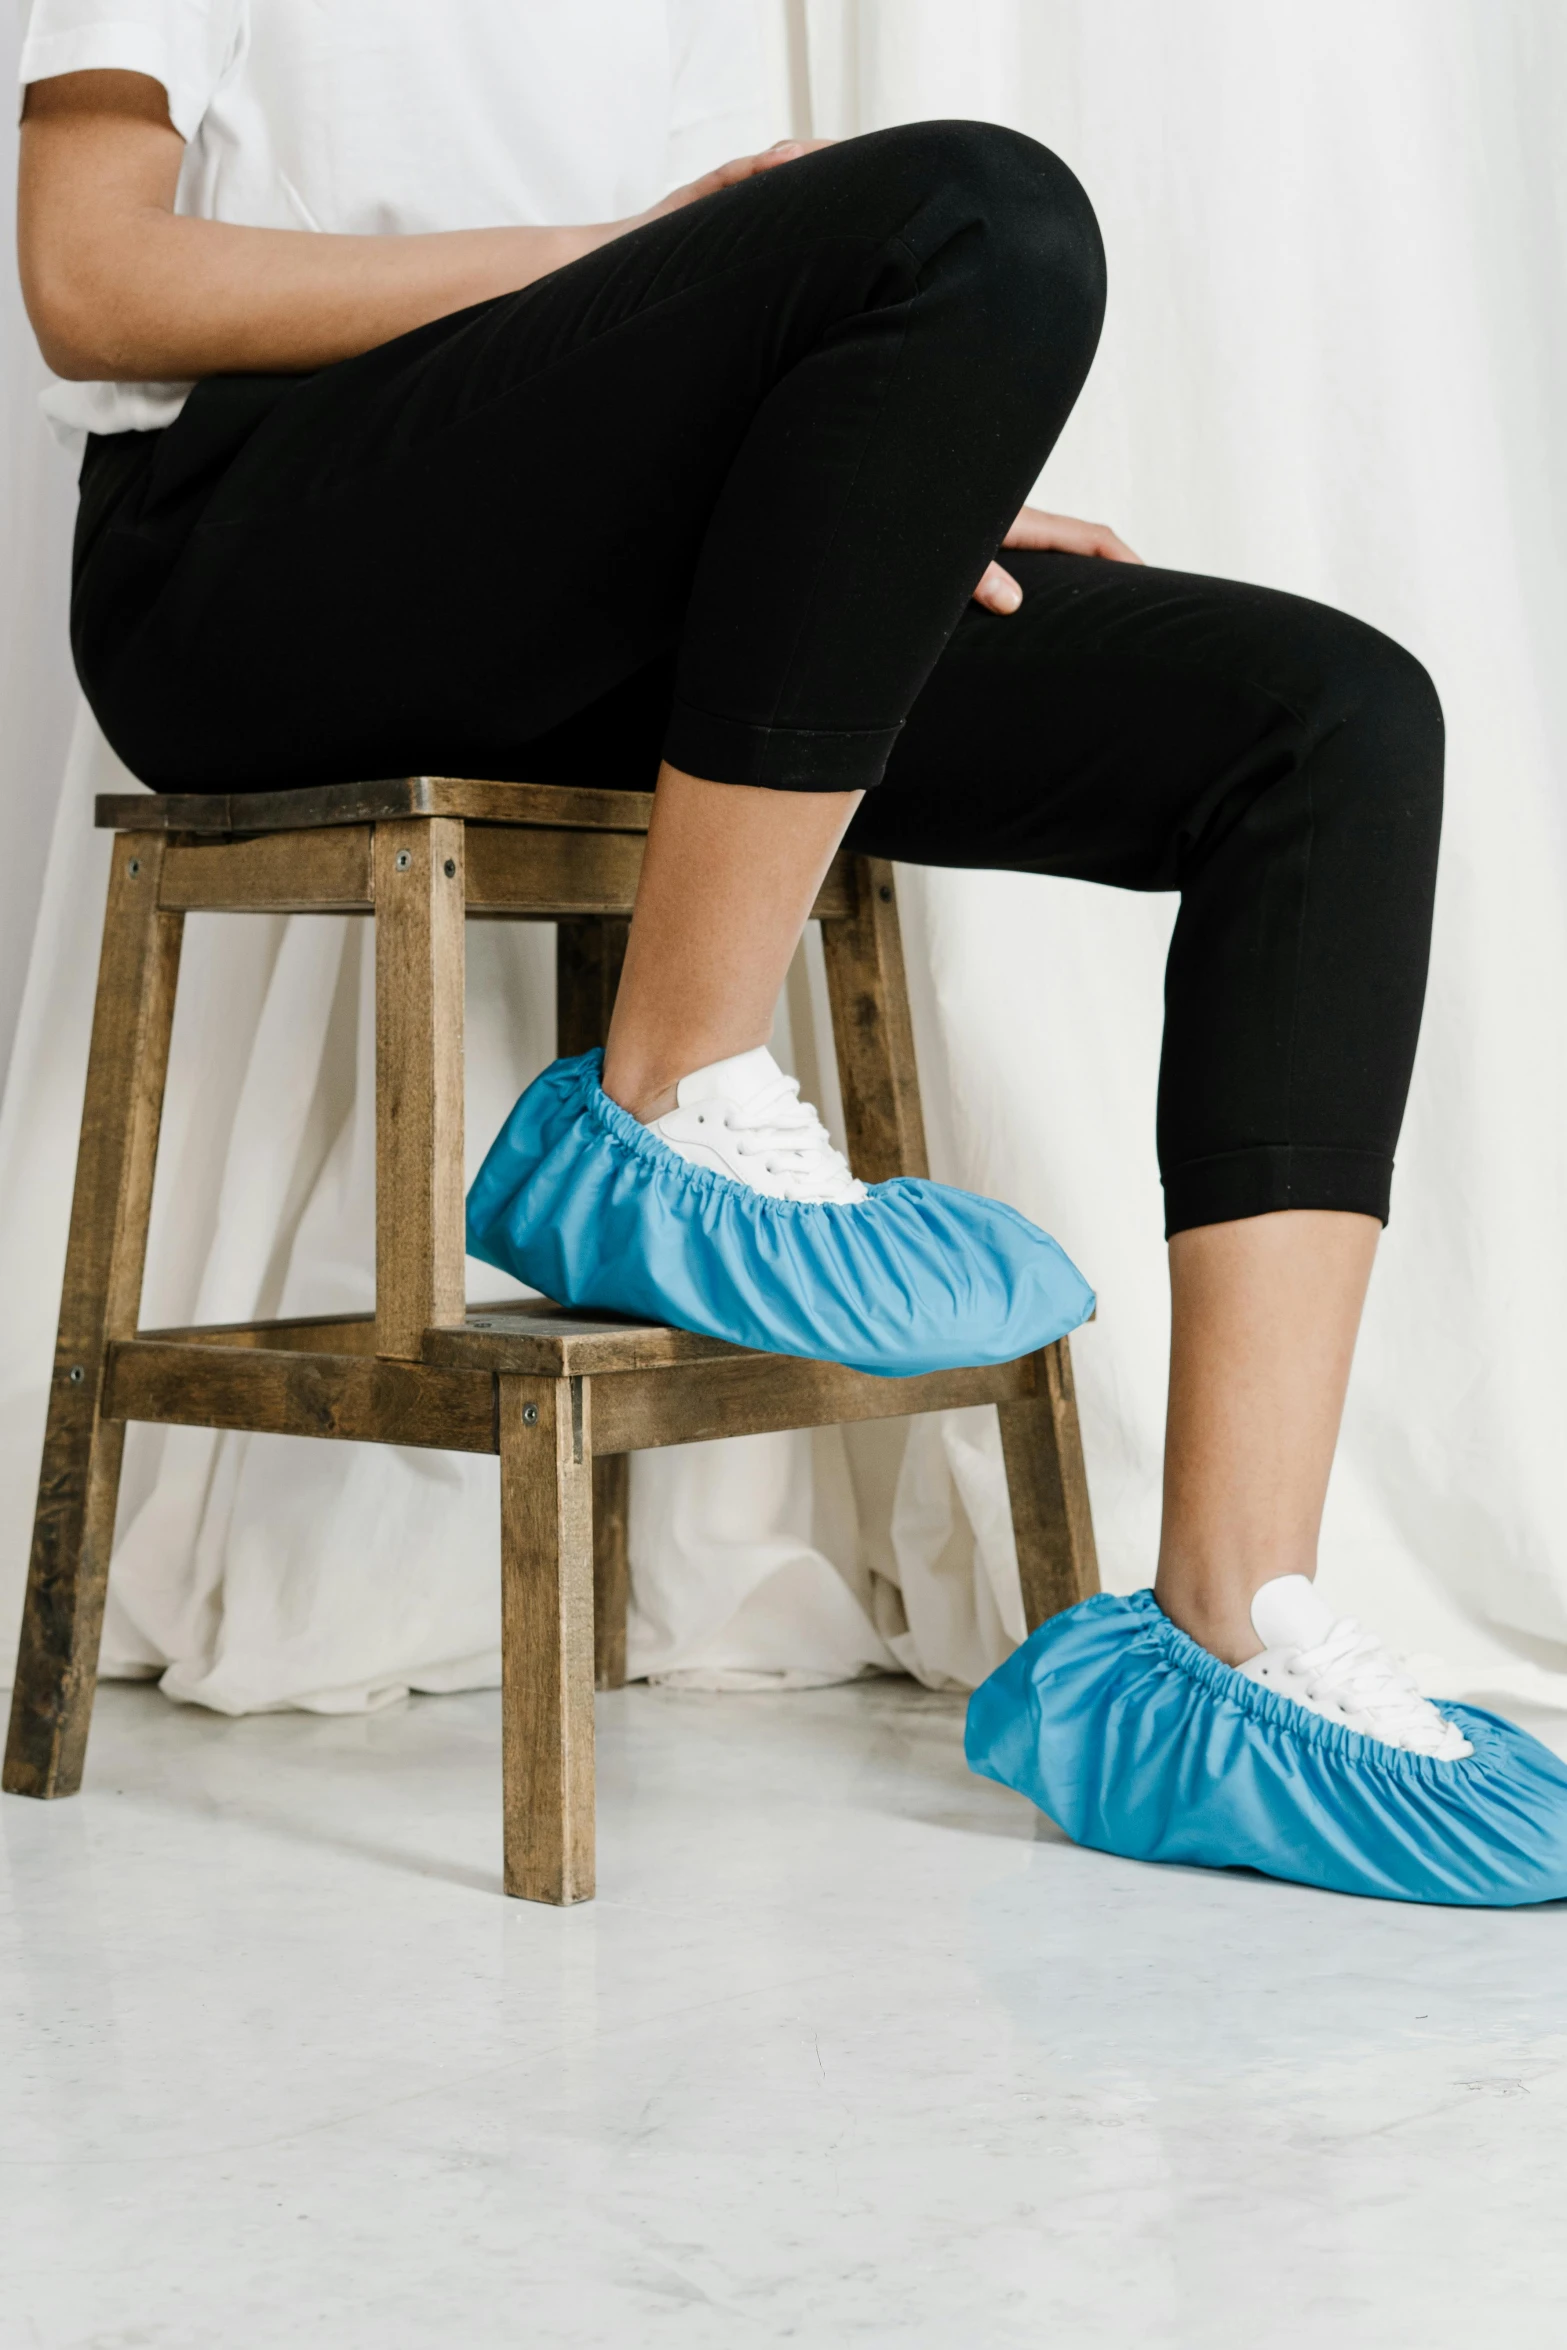 a woman sitting on top of a wooden stool, blue shoes, made of lab tissue, thumbnail, scrubs